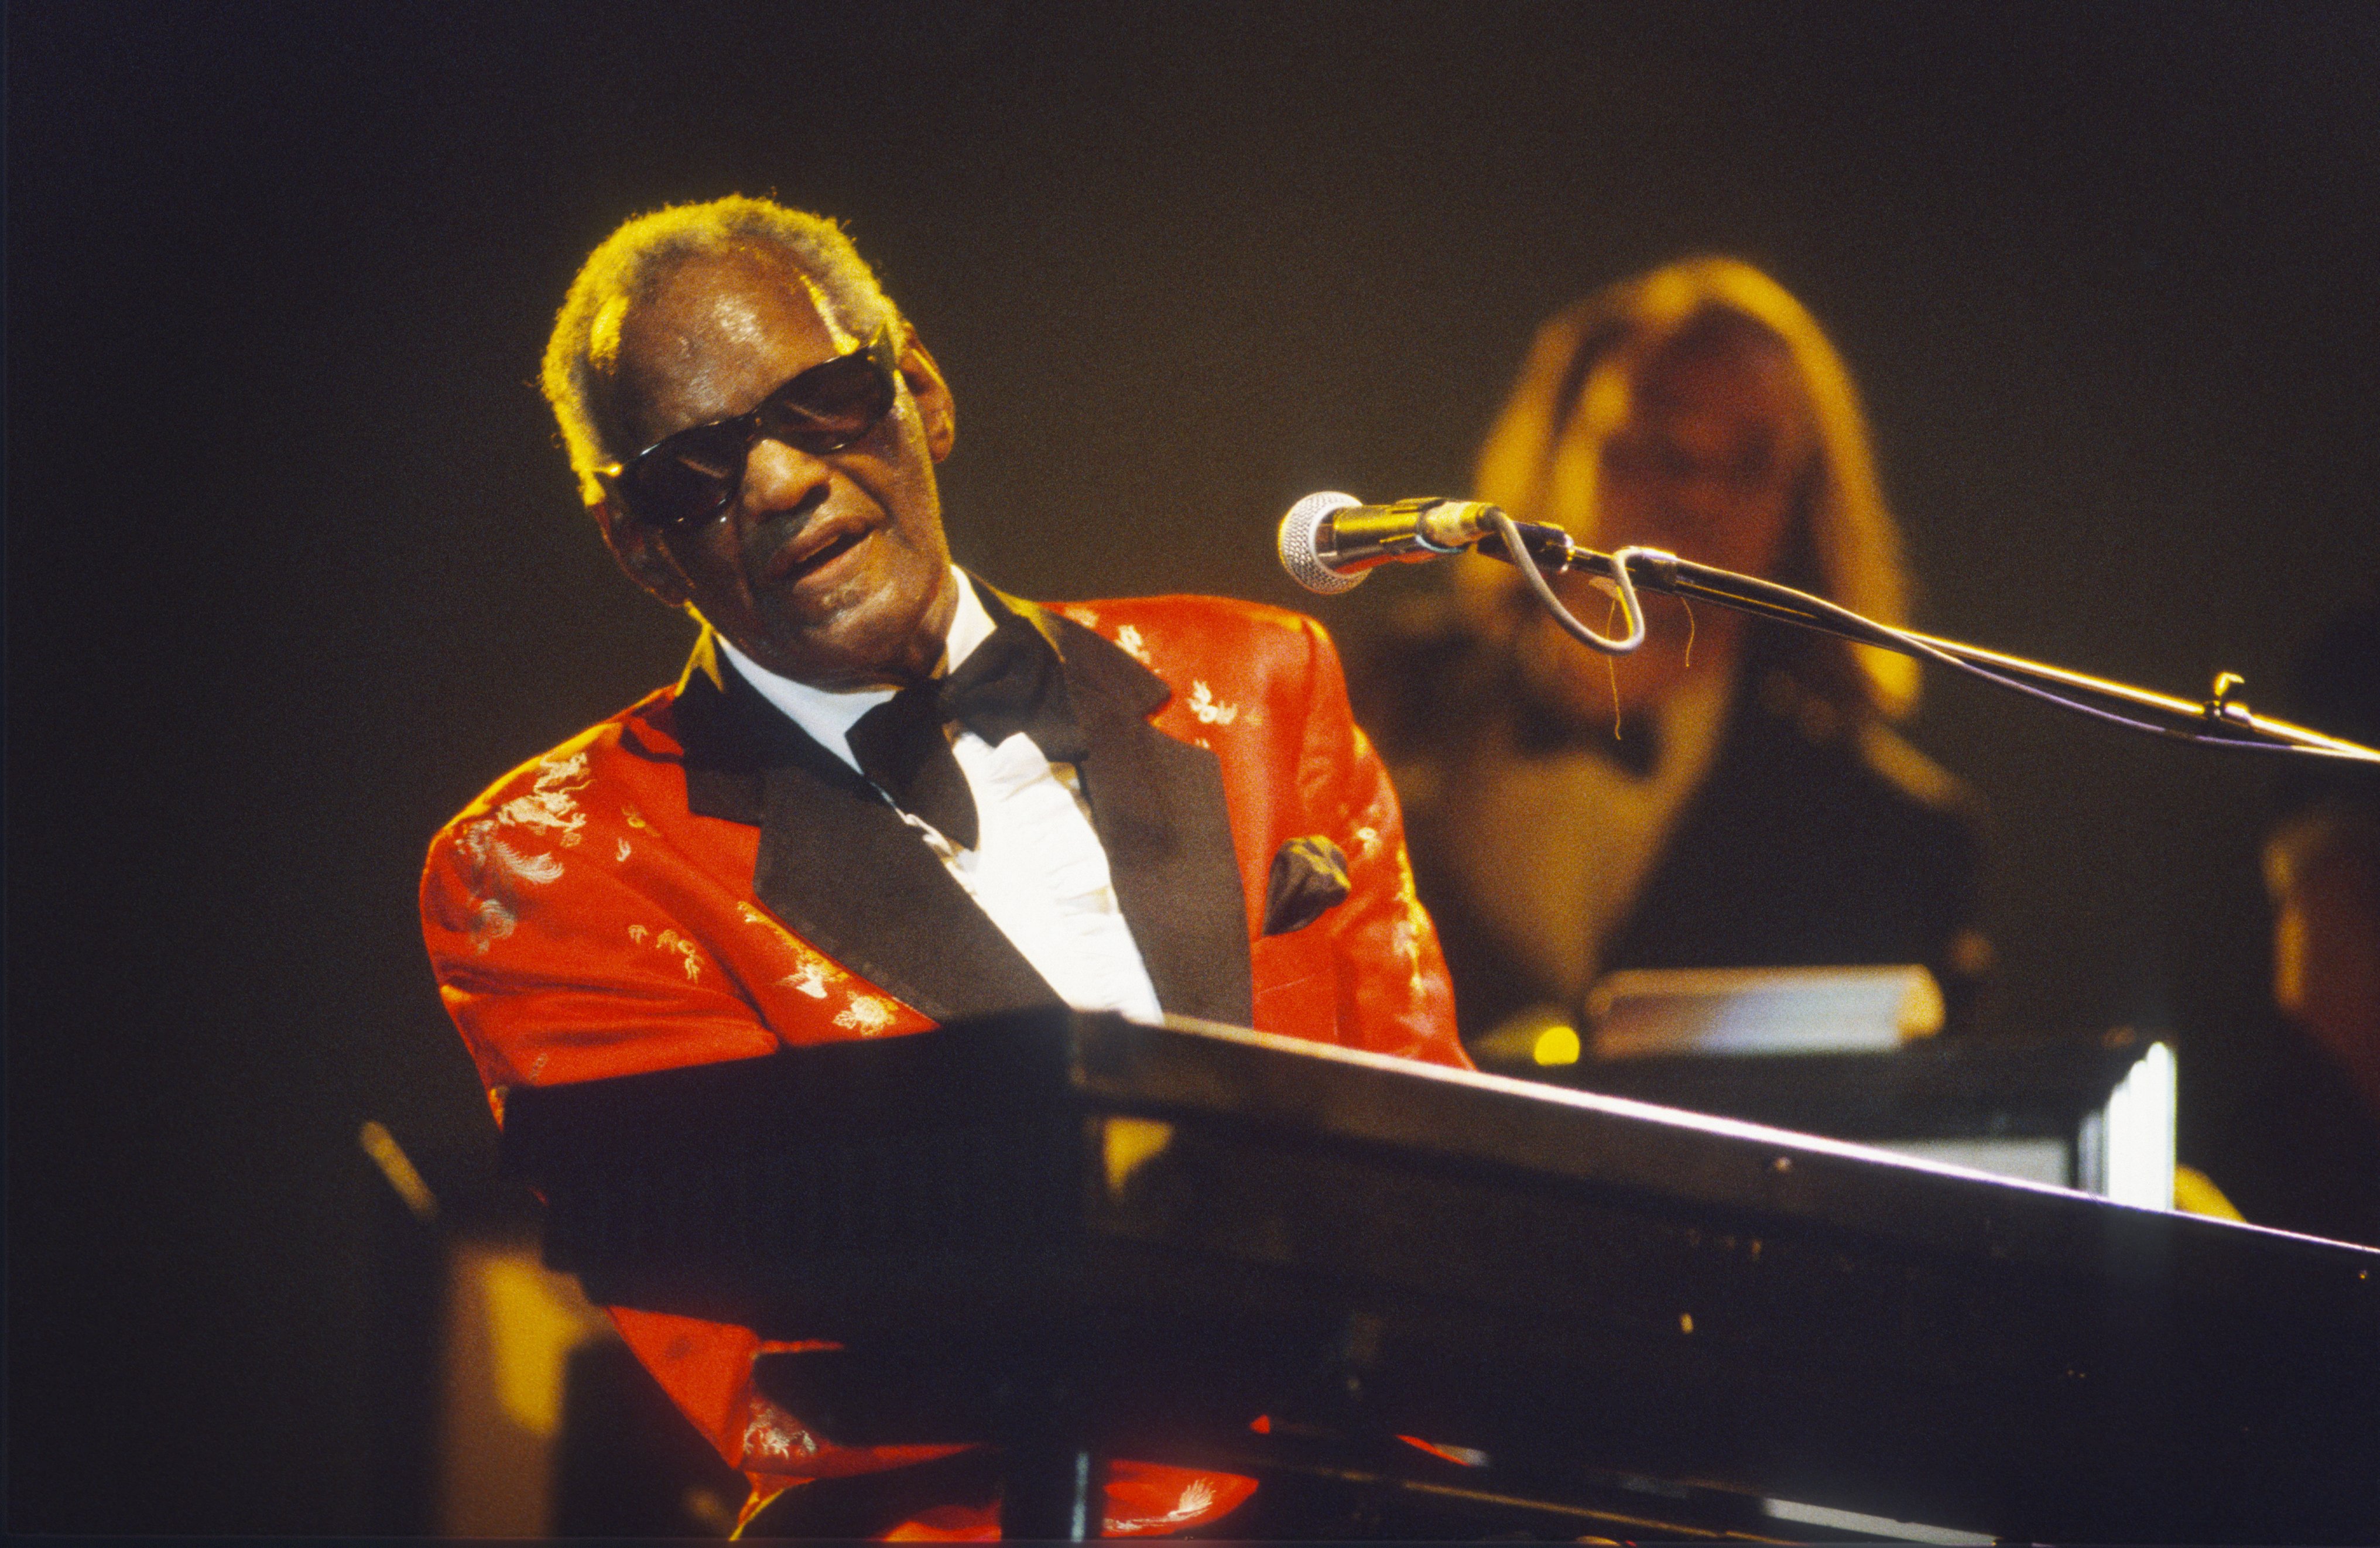 Ray Charles performed on stage at the Rhythm 'n' Blues Festival in Belgium in July 1994. | usage worldwide  Photo: Getty Images